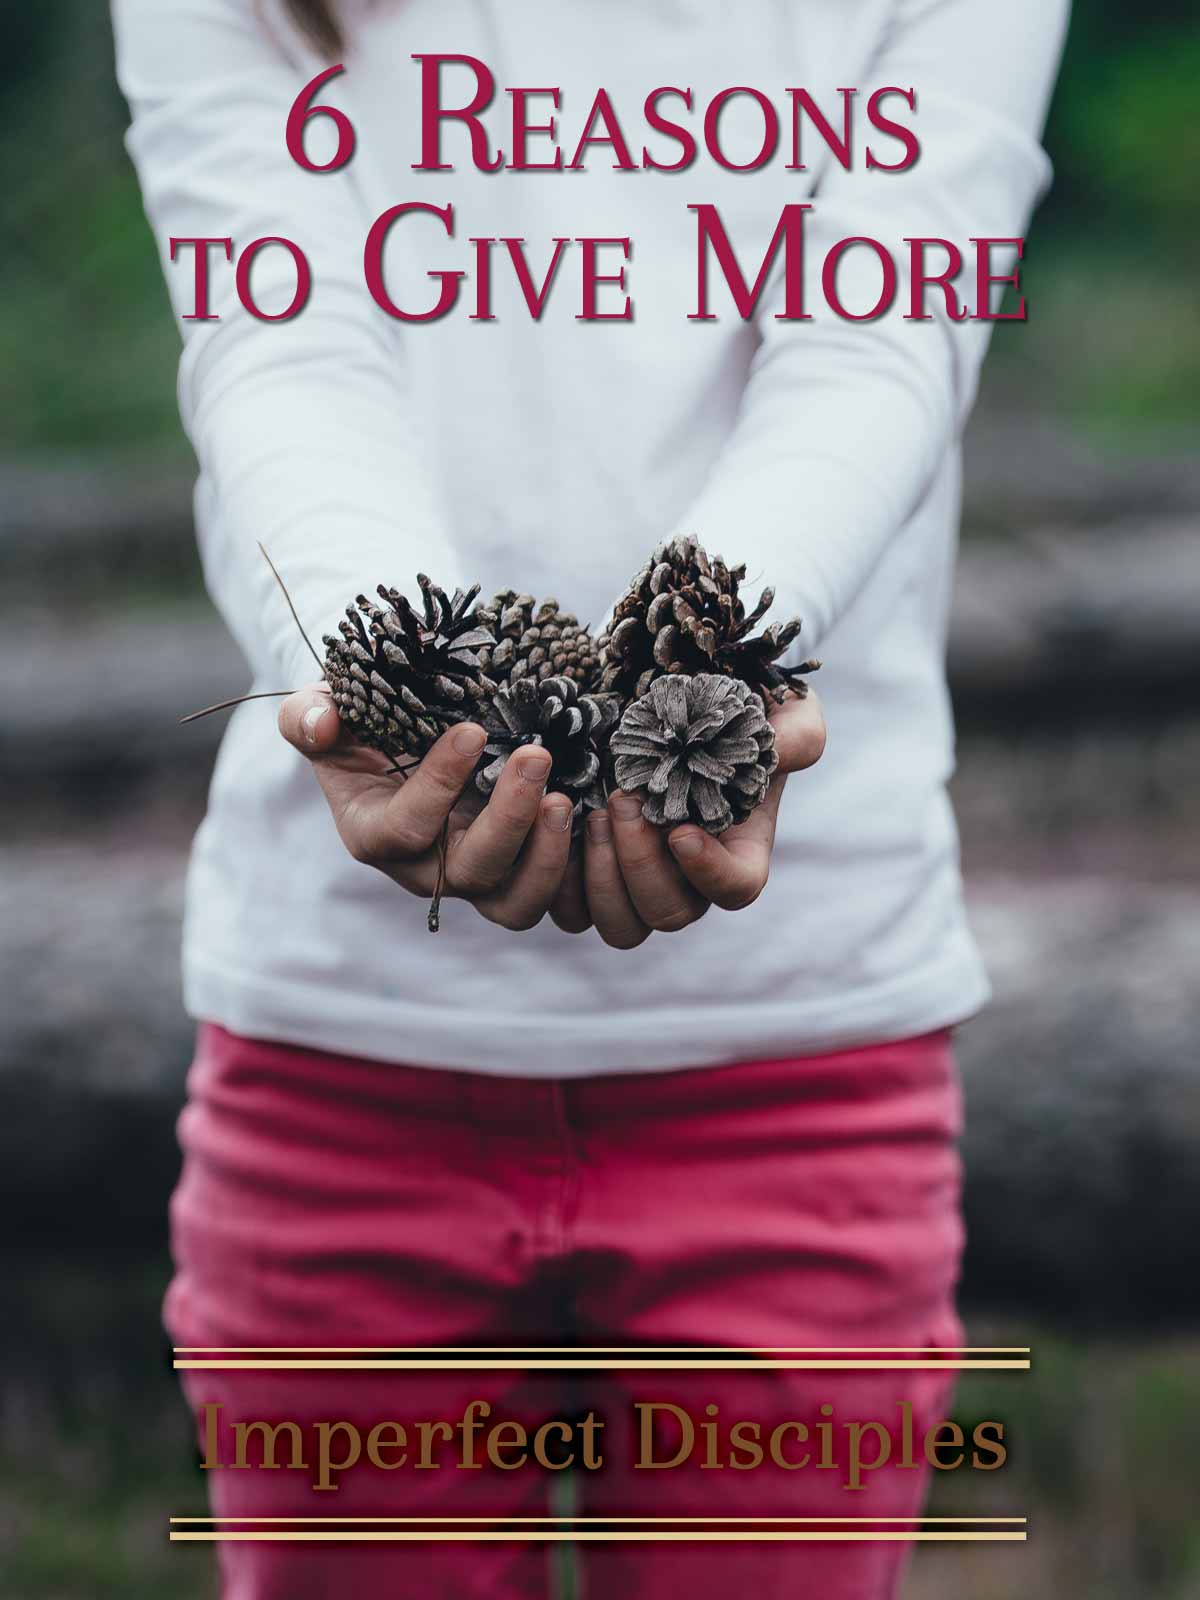 6 Reasons to Give More